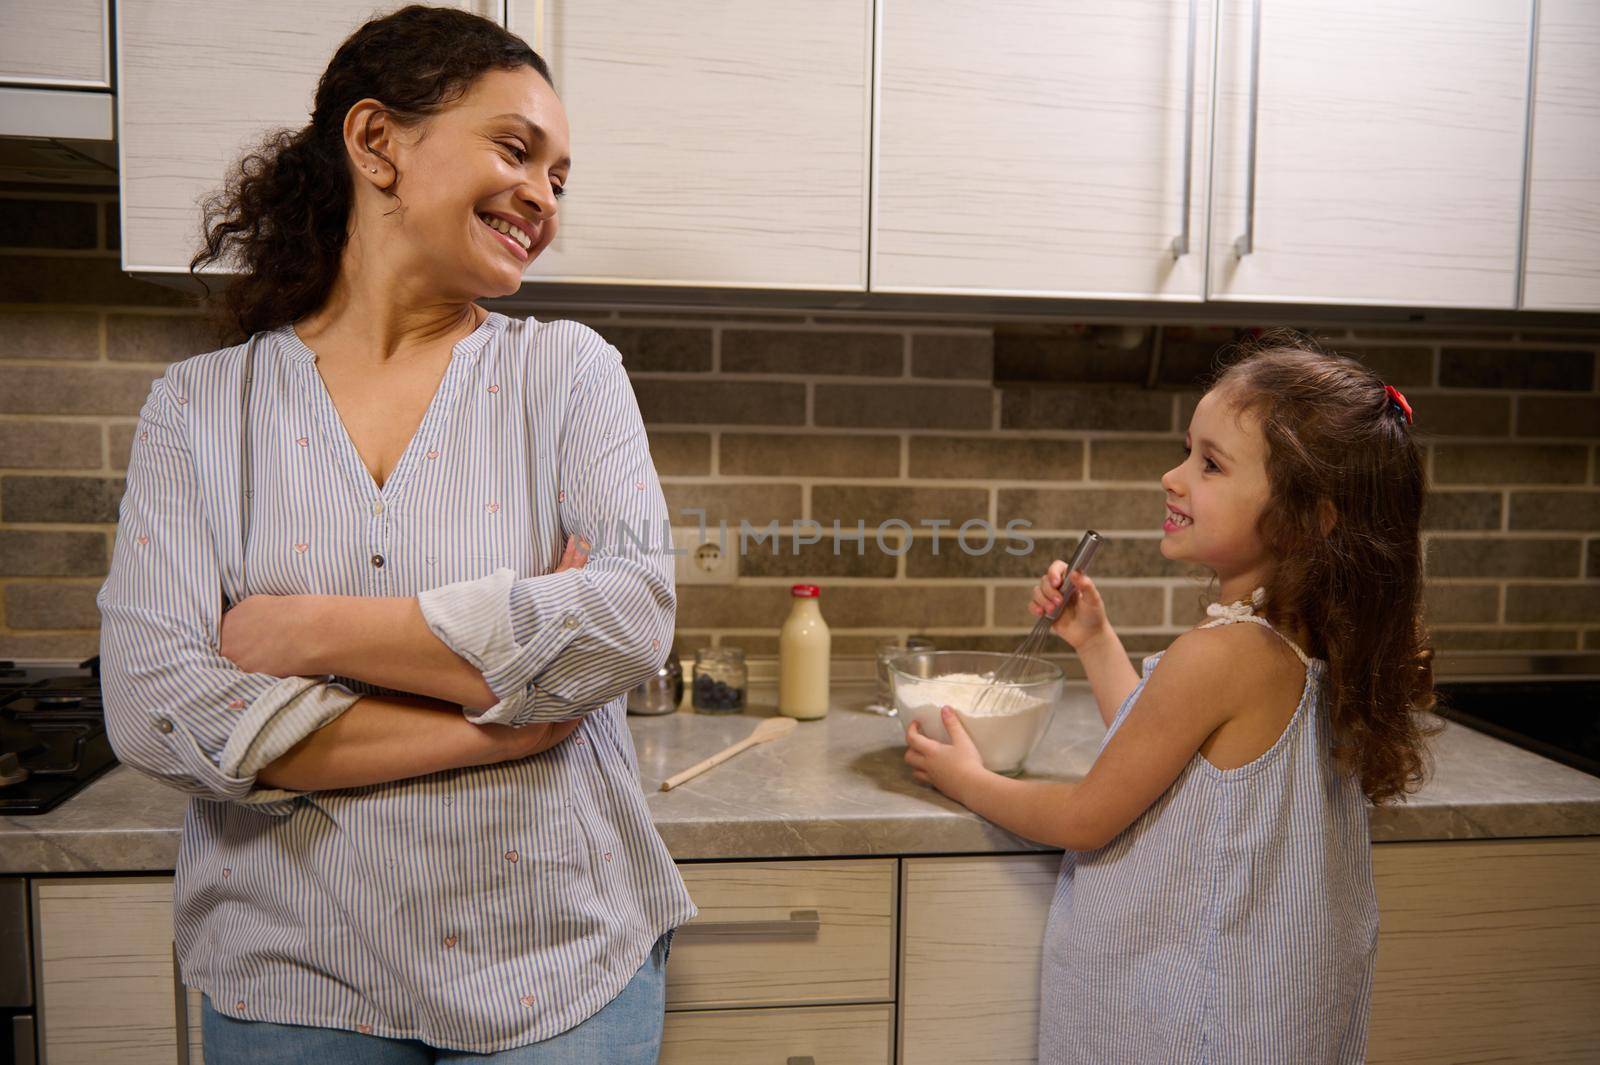 Beautiful woman, happy loving mother leaning at kitchen countertop and admiring her adorable daughter cute baby girl mixing ingredients in a glass bowl while learning kneading pancakes dough